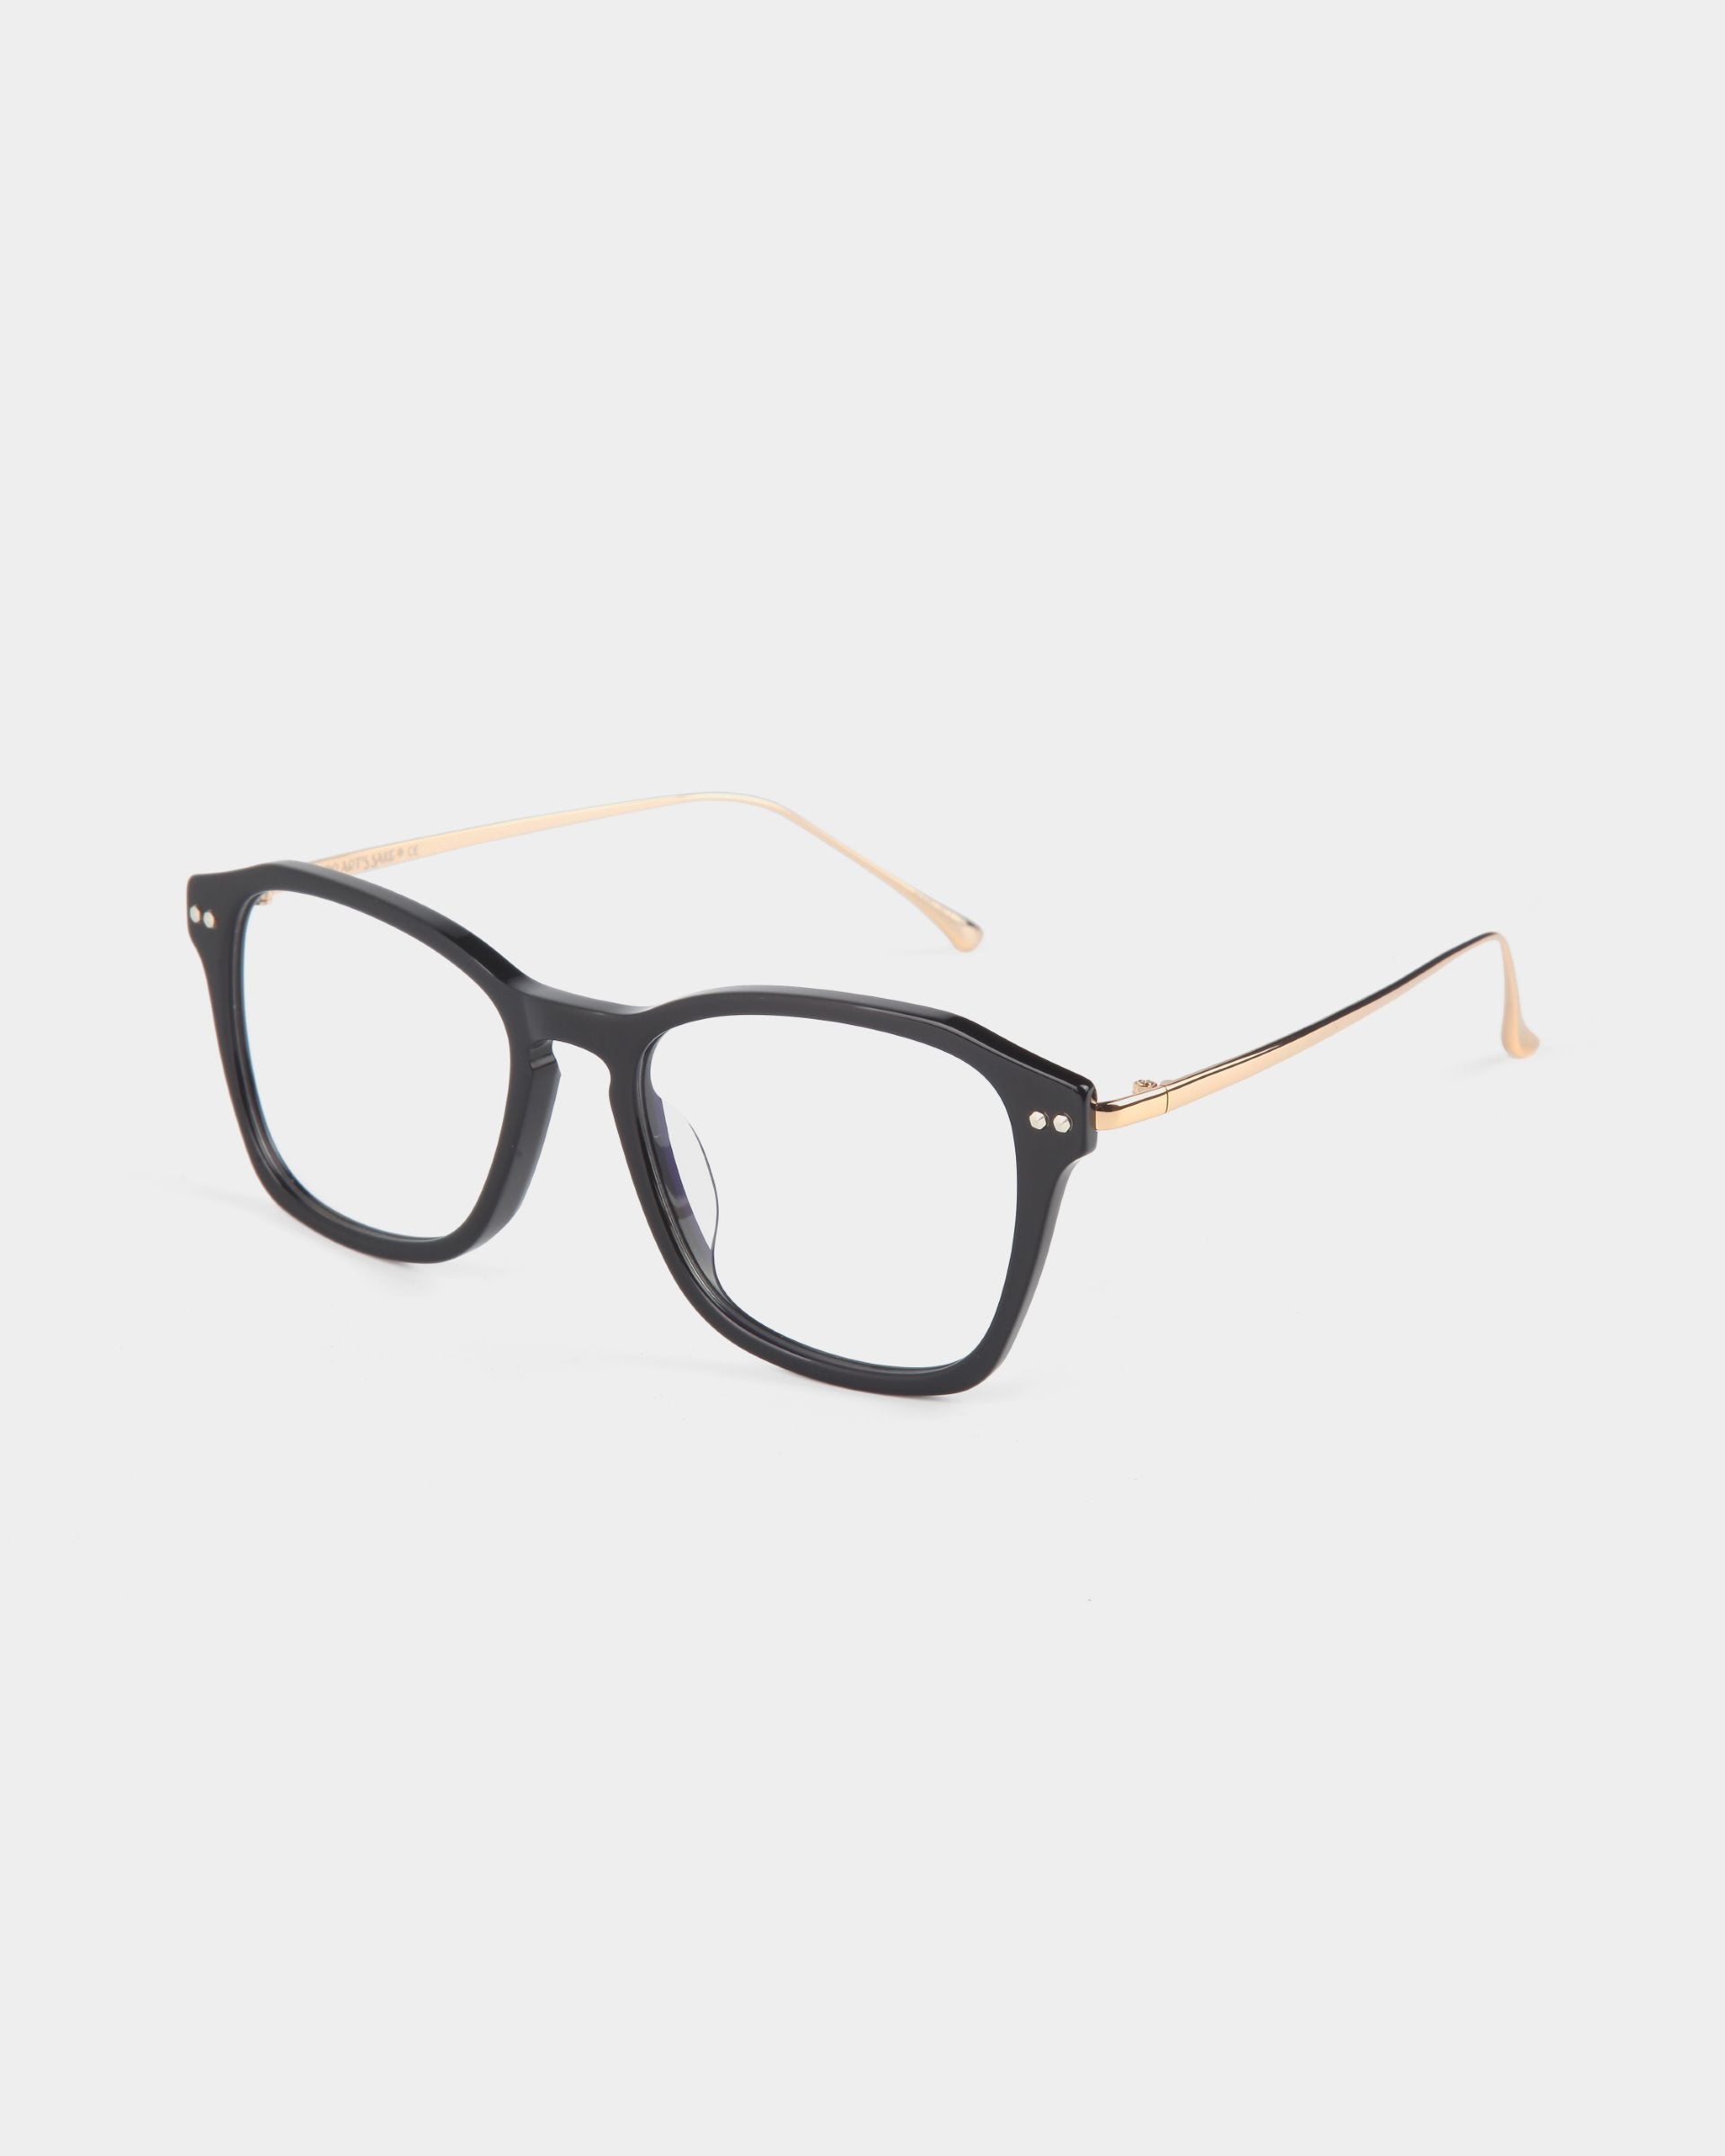 A pair of eyeglasses with matte black rectangular frames and thin metallic gold temples. The ends of the temples are rounded for added comfort. Made with stainless steel frames, these glasses also feature a blue light filter. Displayed on a clean white background, this is the Morris by For Art&#39;s Sake®.